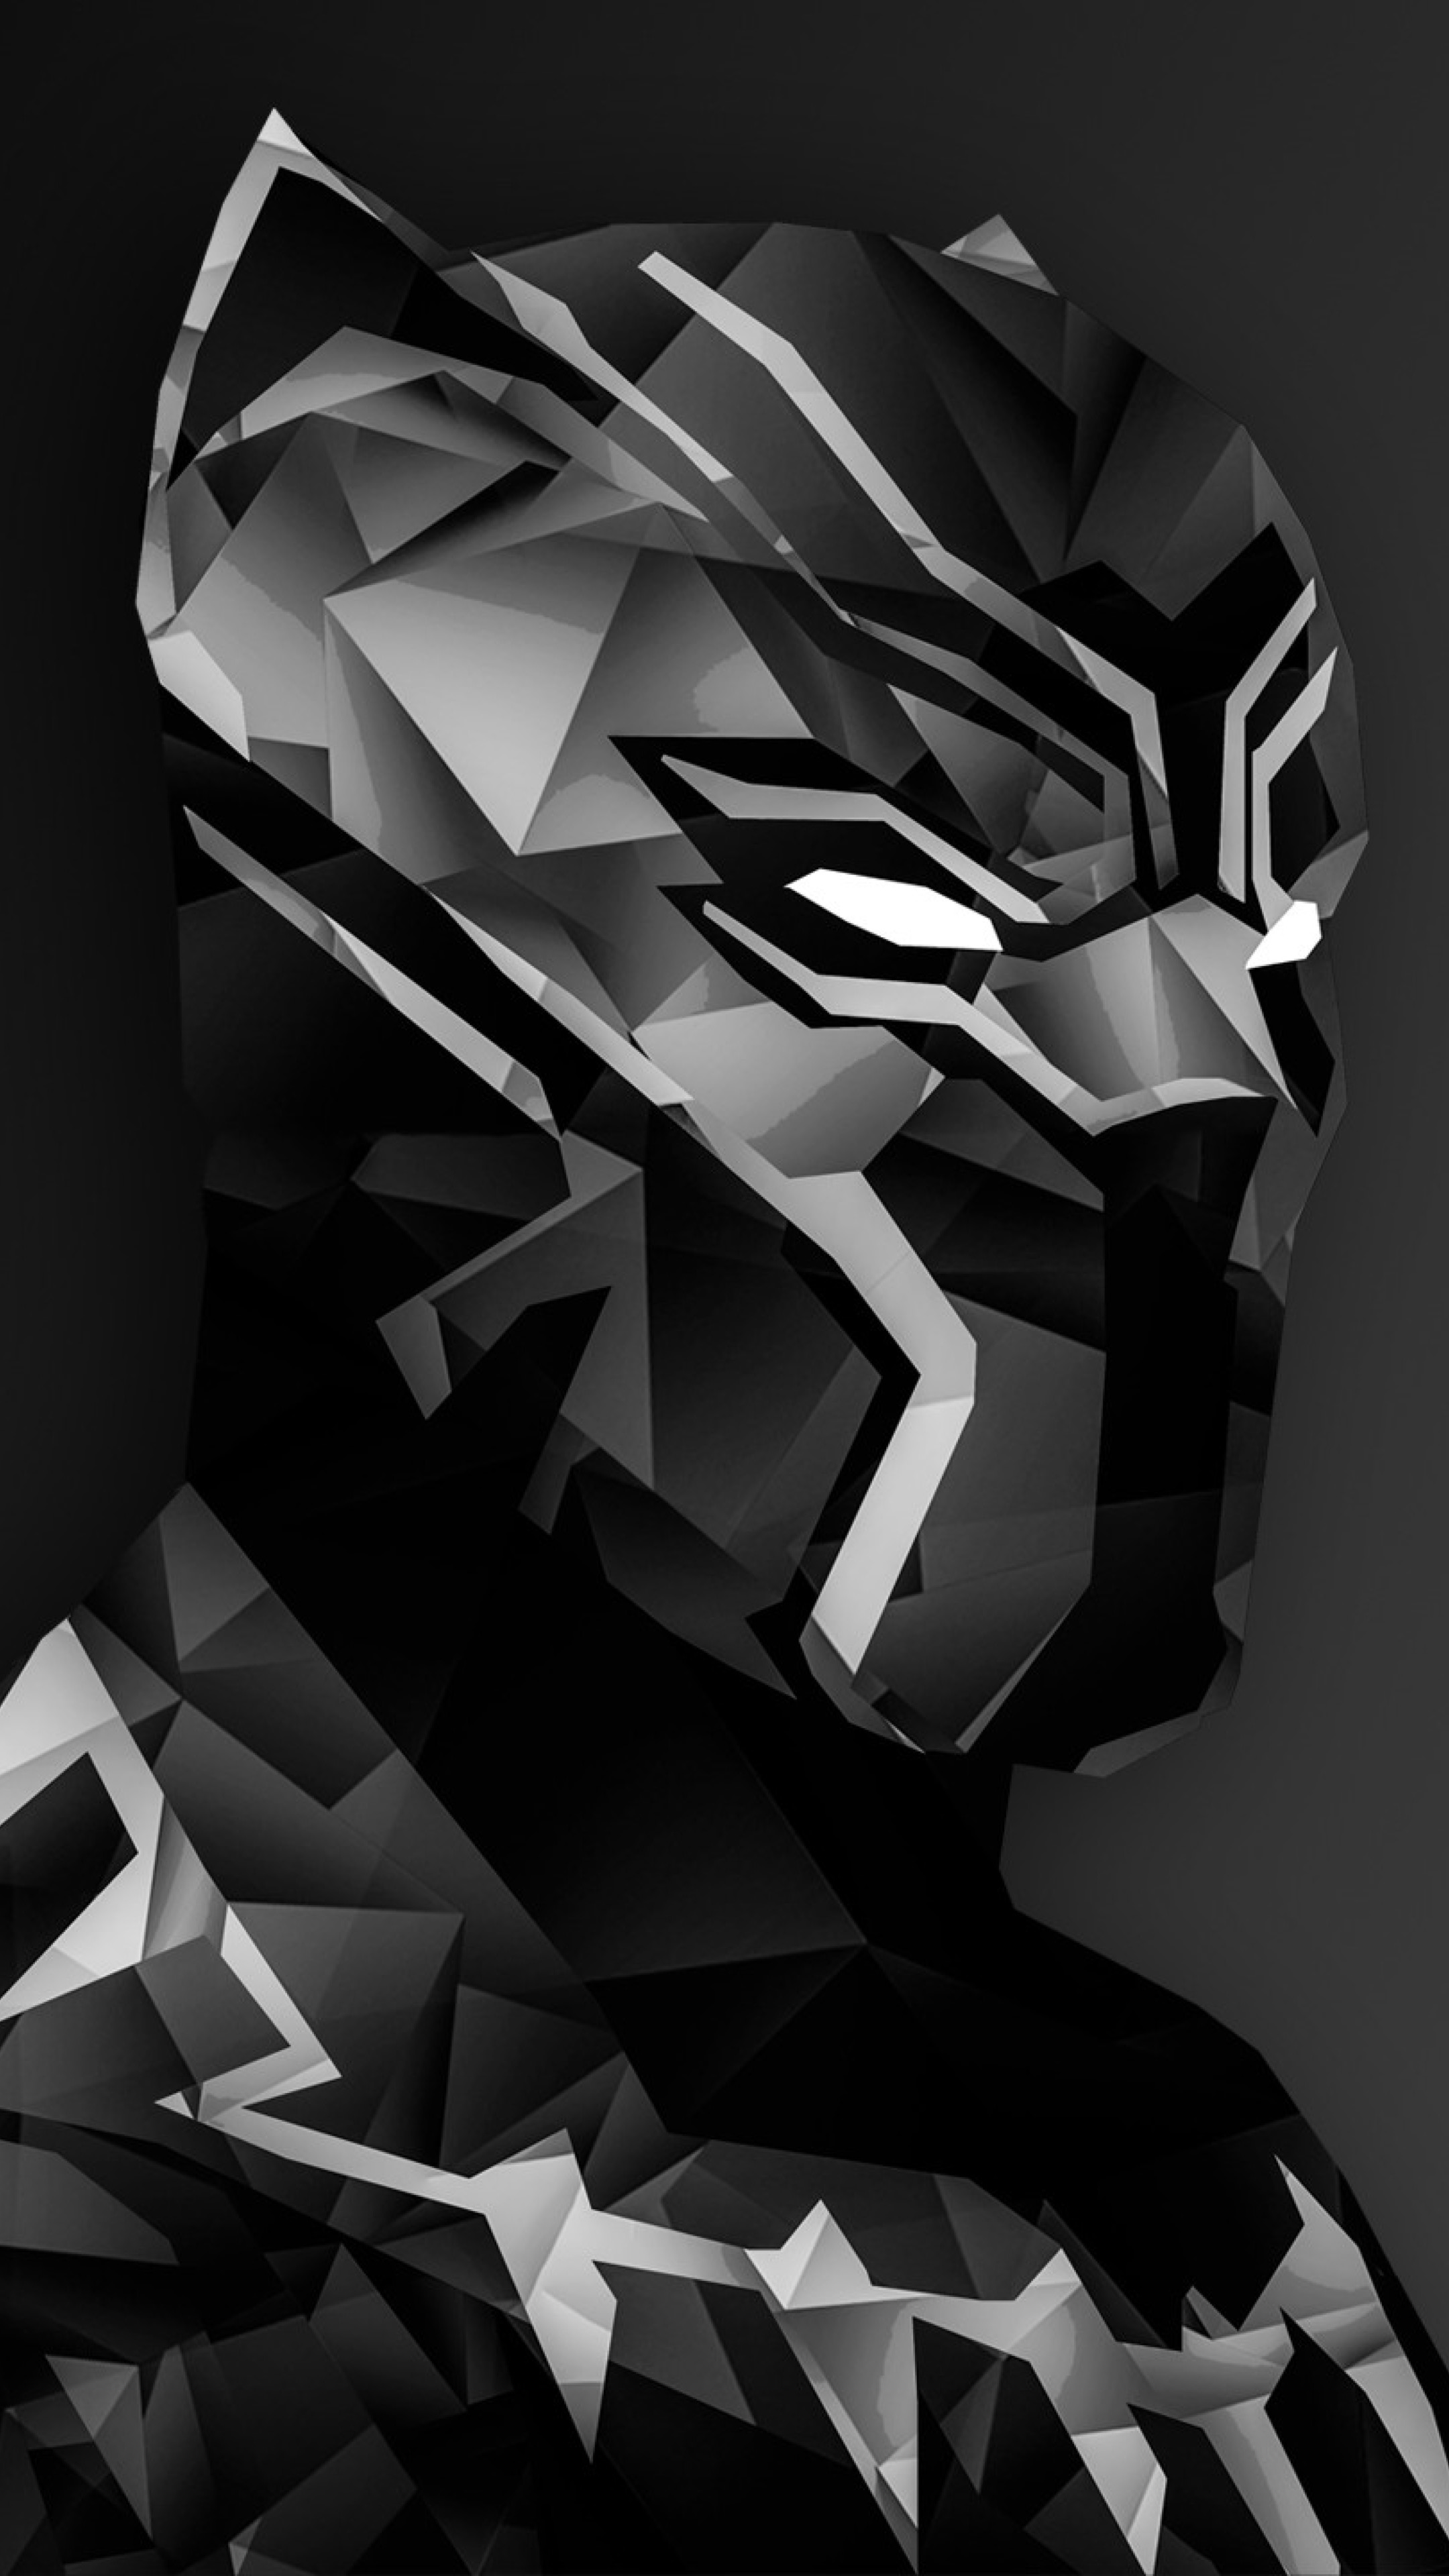 Black panther wallpaper hd download for android mobile